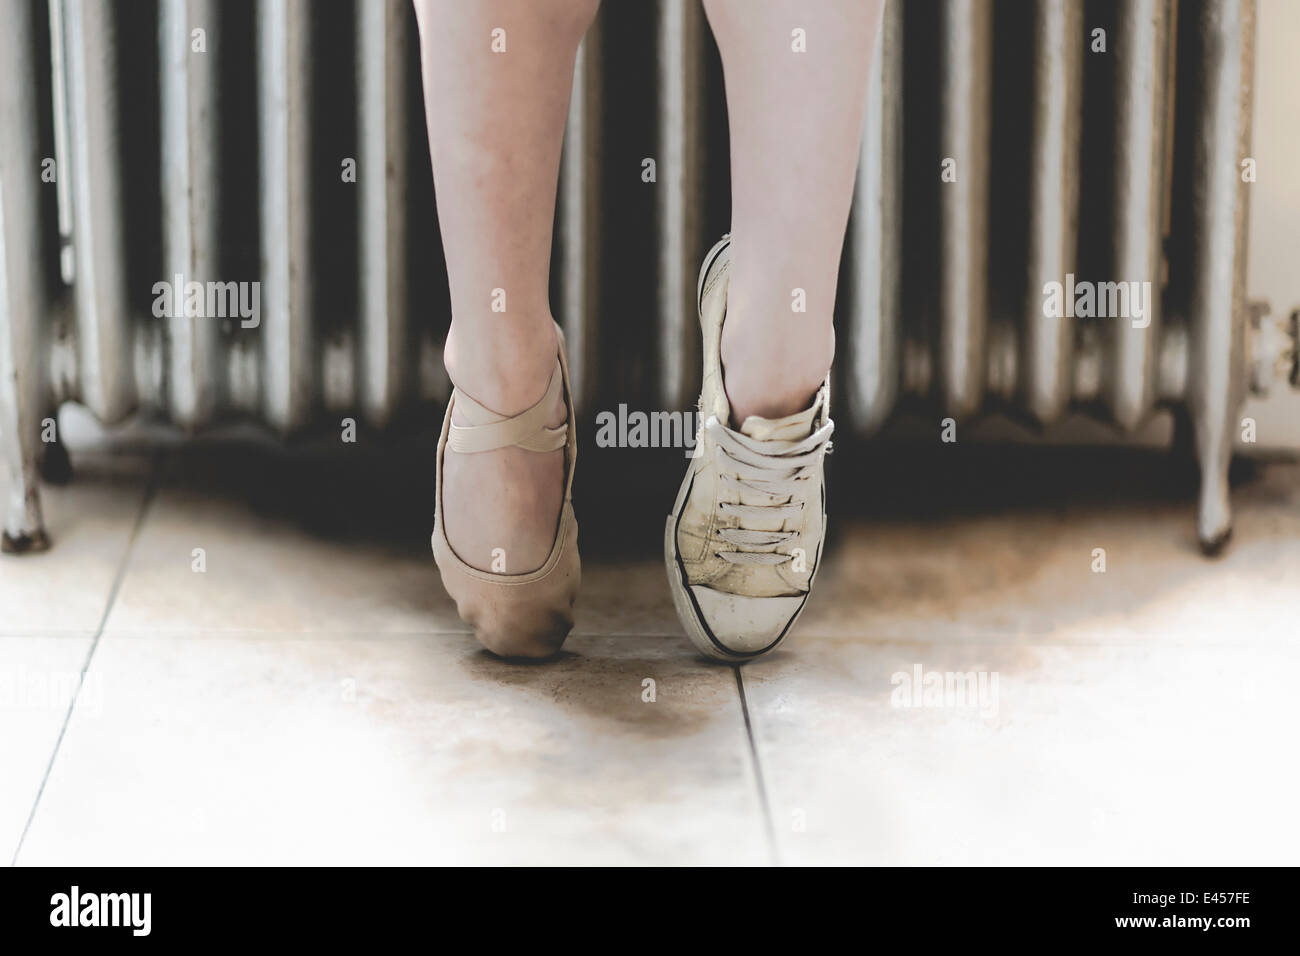 Dancer wearing one ballet shoe and one sneaker Stock Photo